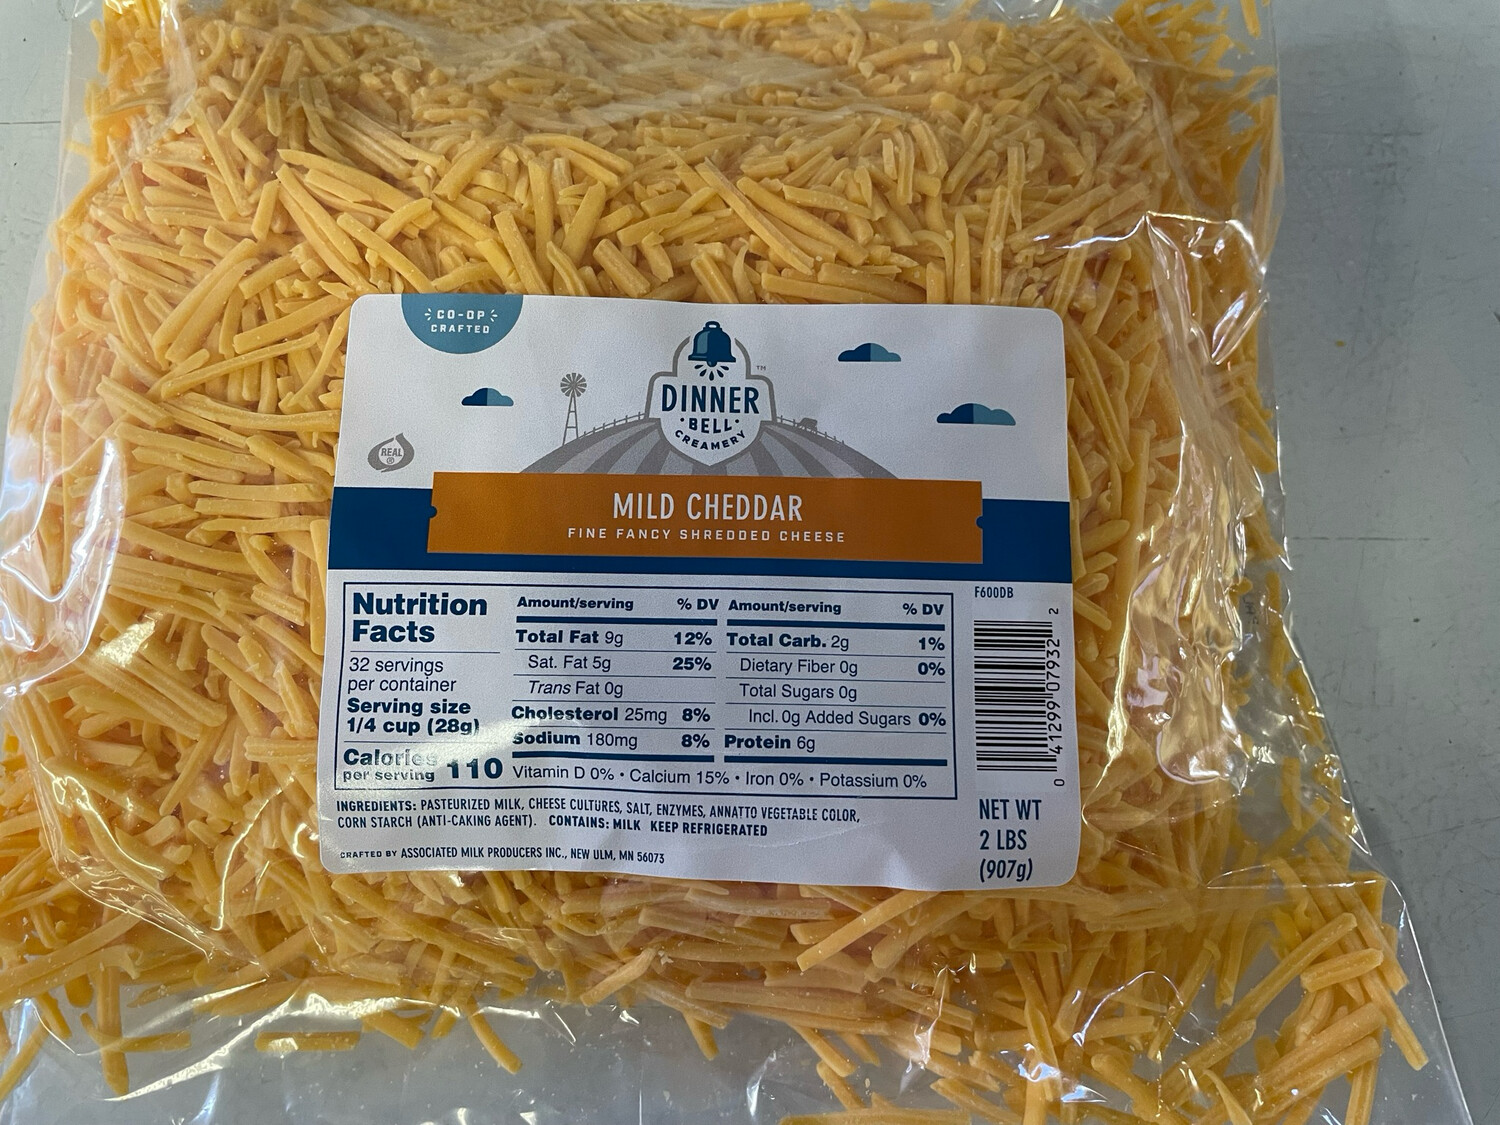 Cheese
(*LIMIT 1 CHEESE per household*)